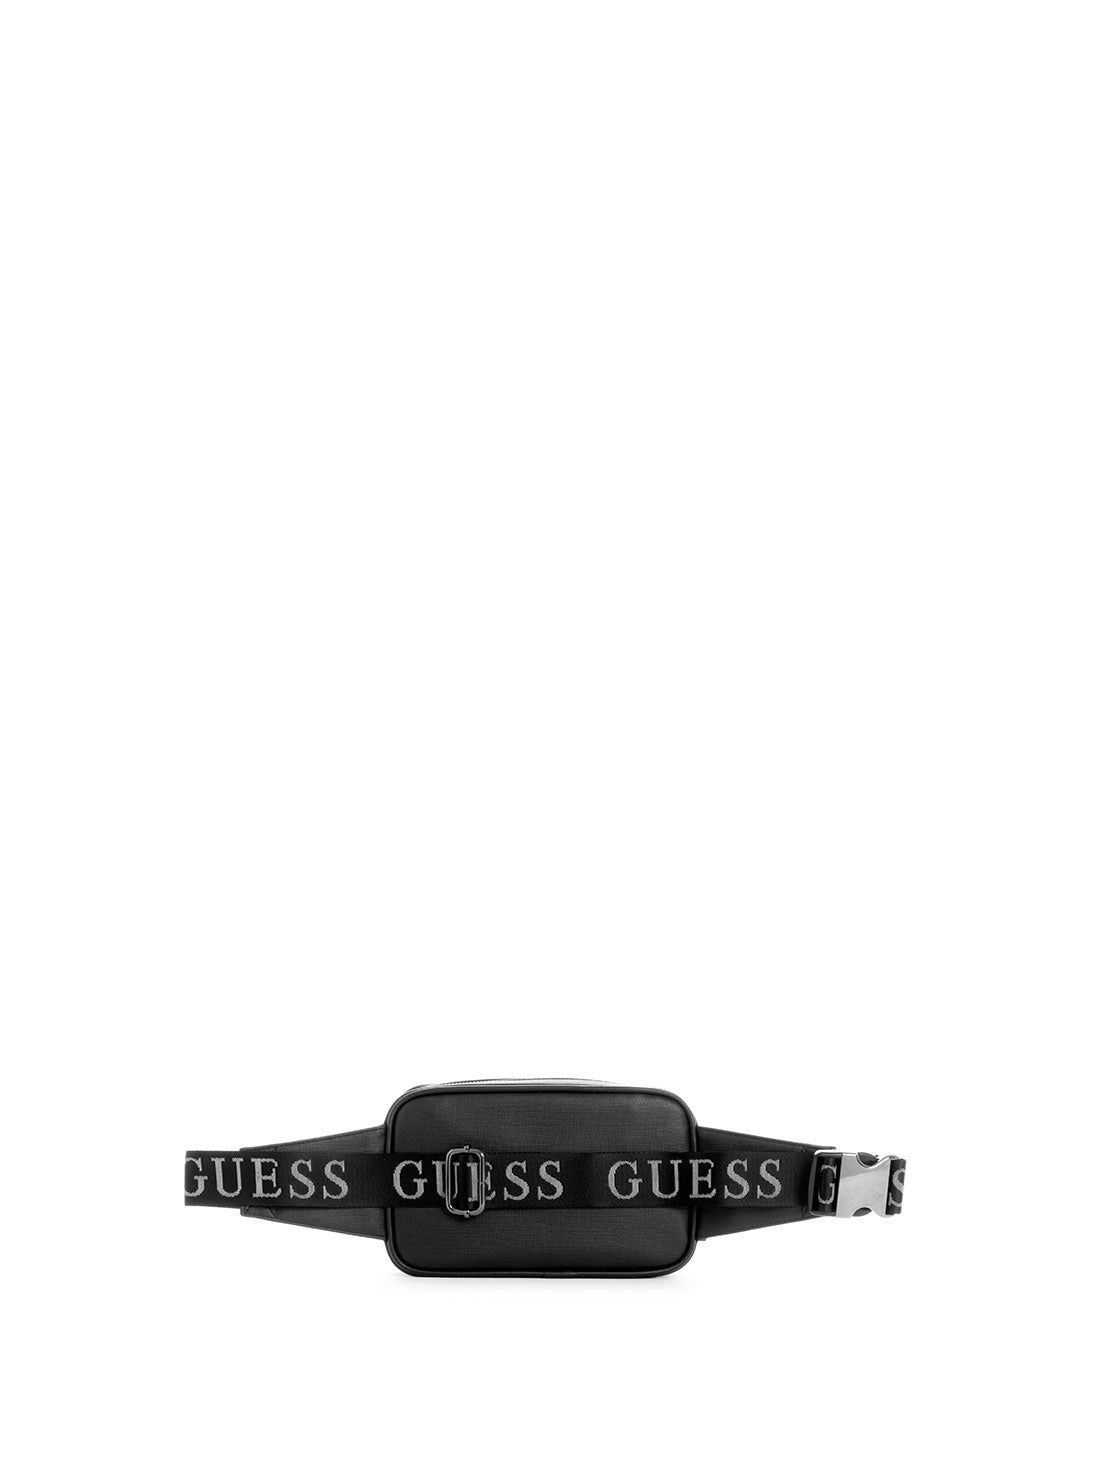 GUESS Black Outfitter Bum Bag back view